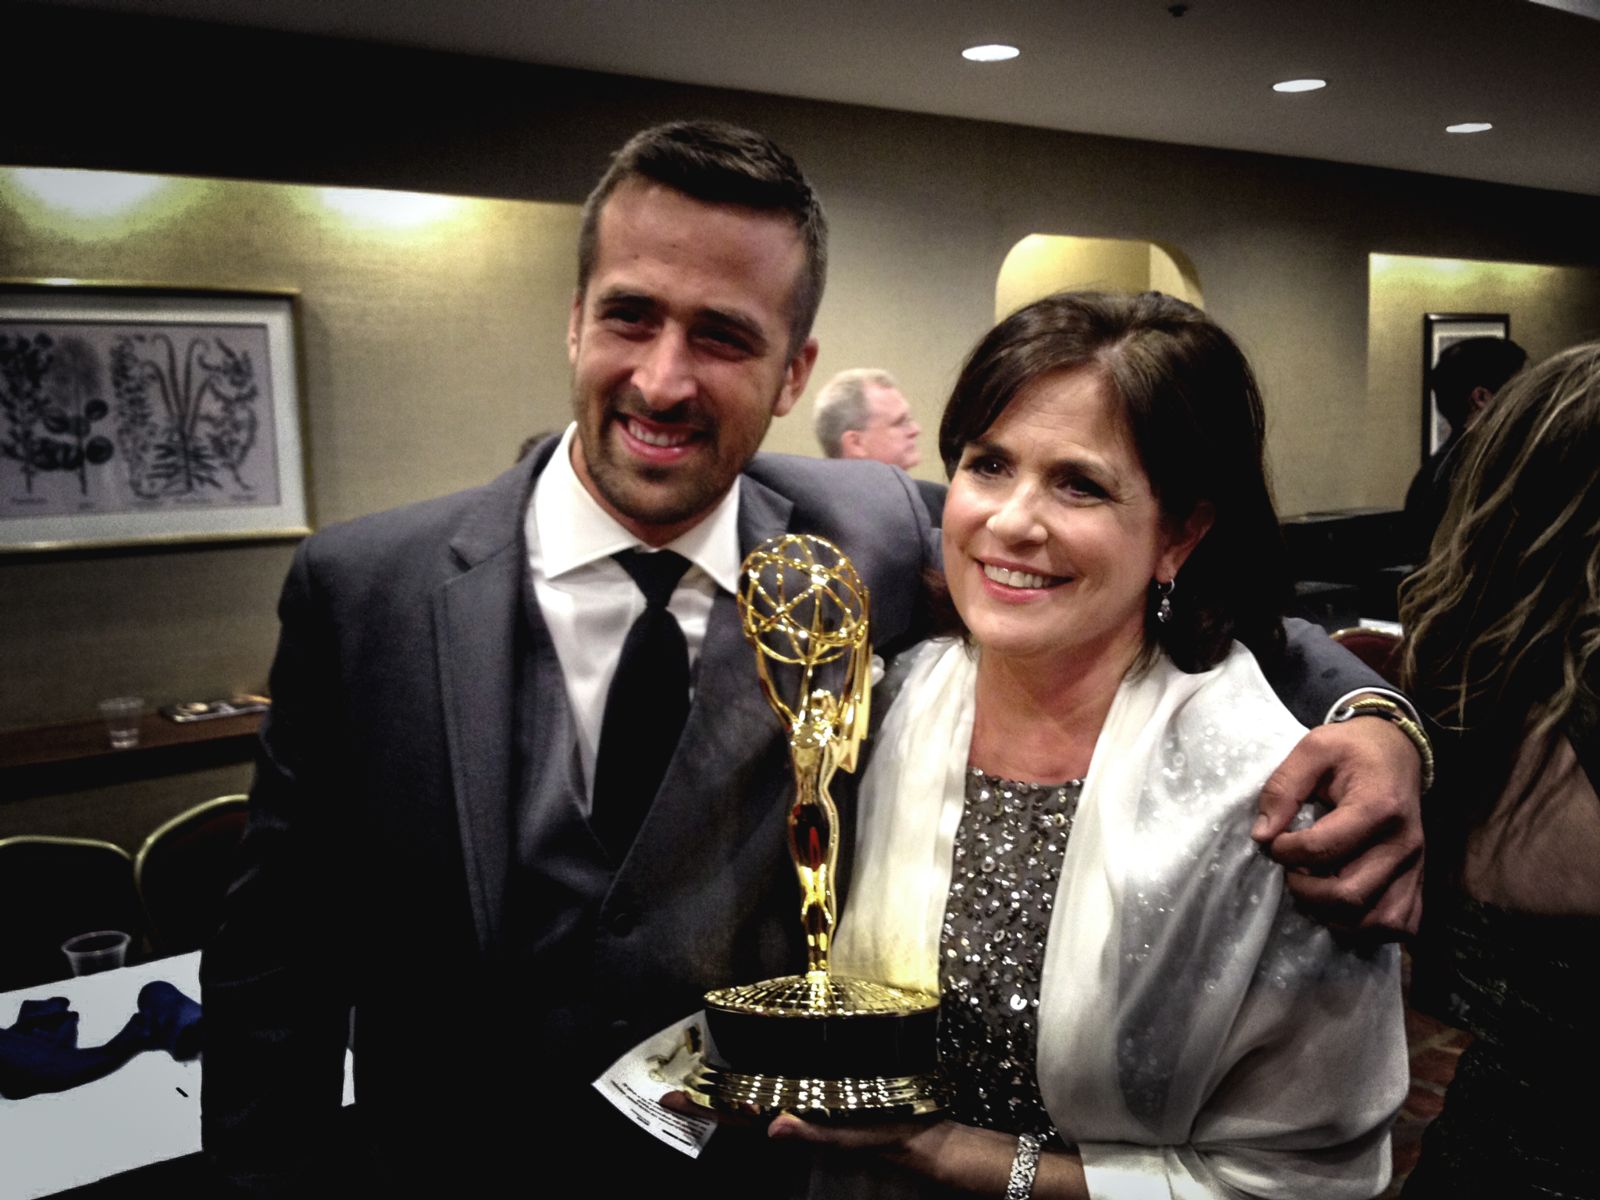 Jack Steward with his mother after receiving an EMMY award - photo by Jack Steward.